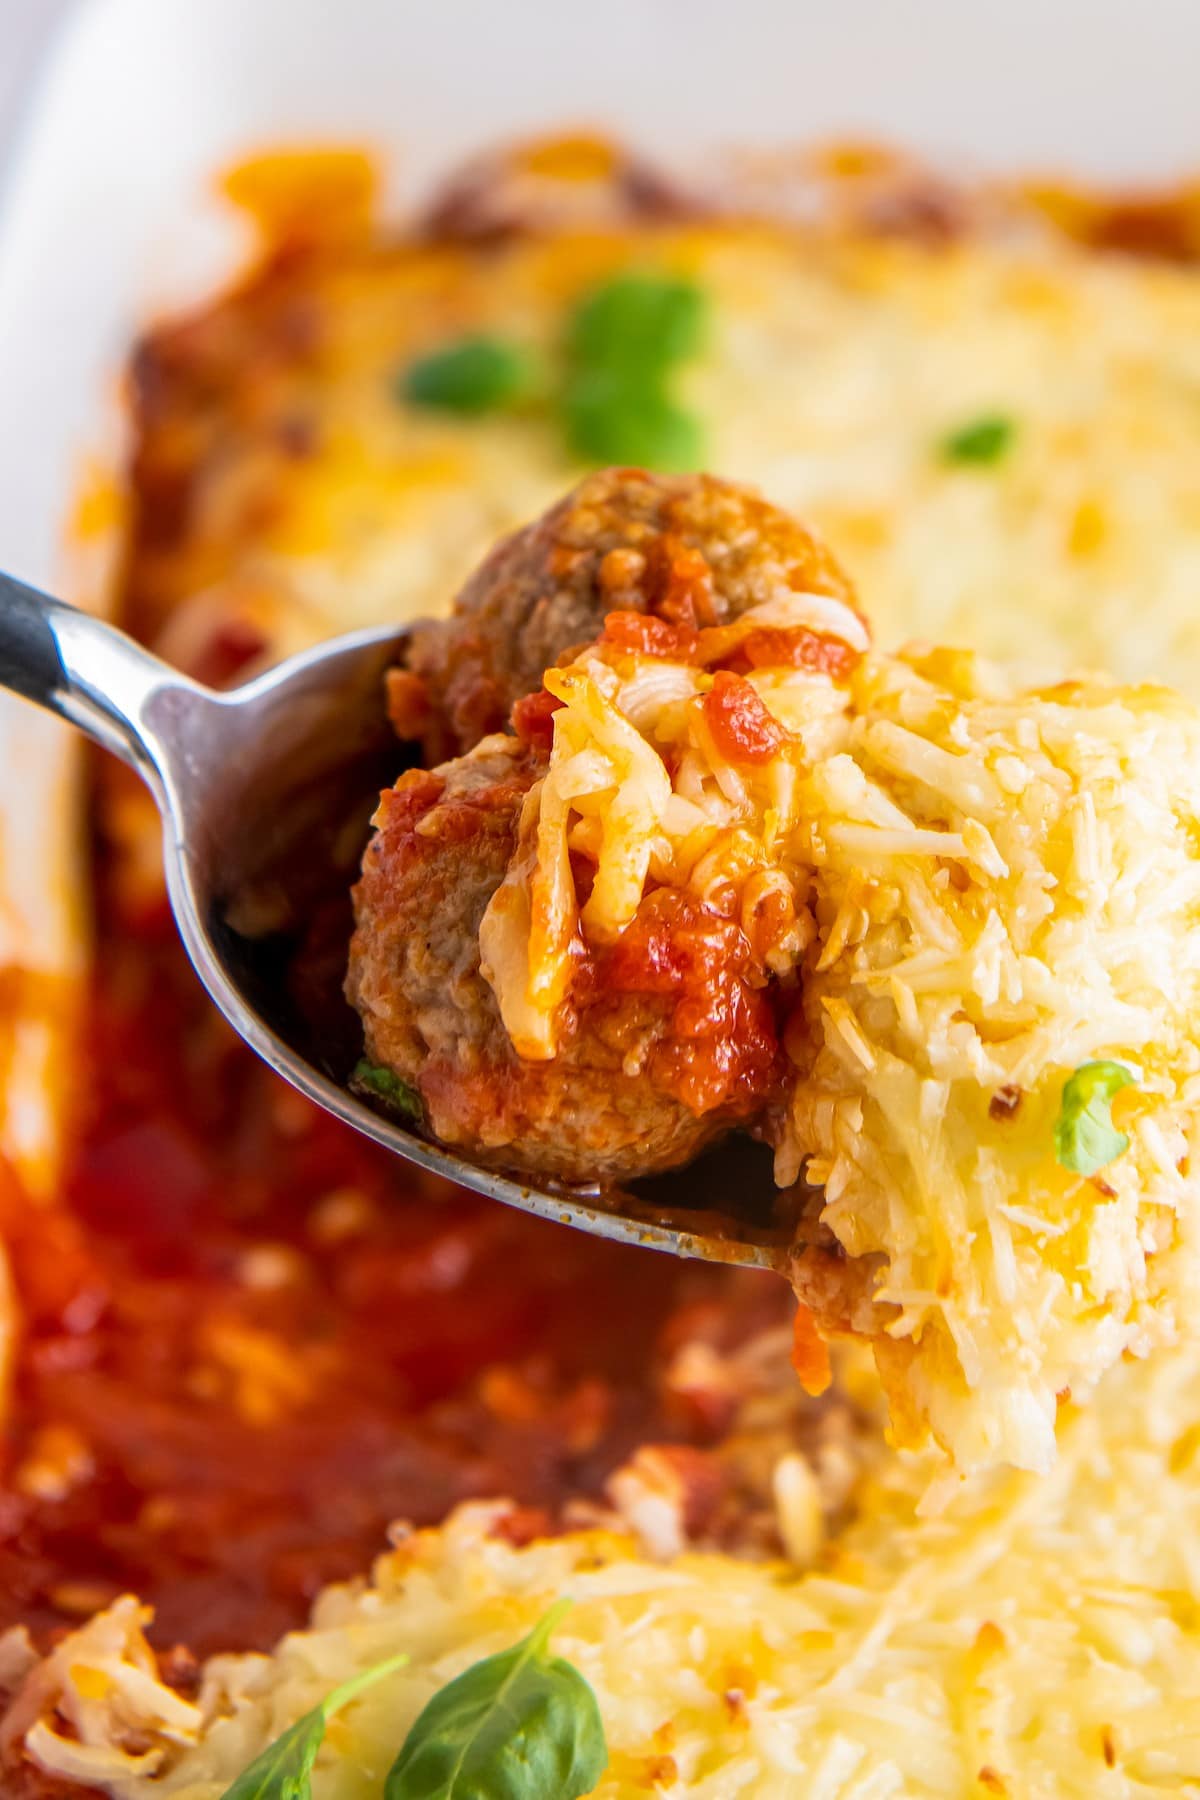 Meatballs smothered in tomato sauce and cheese on a spoon.